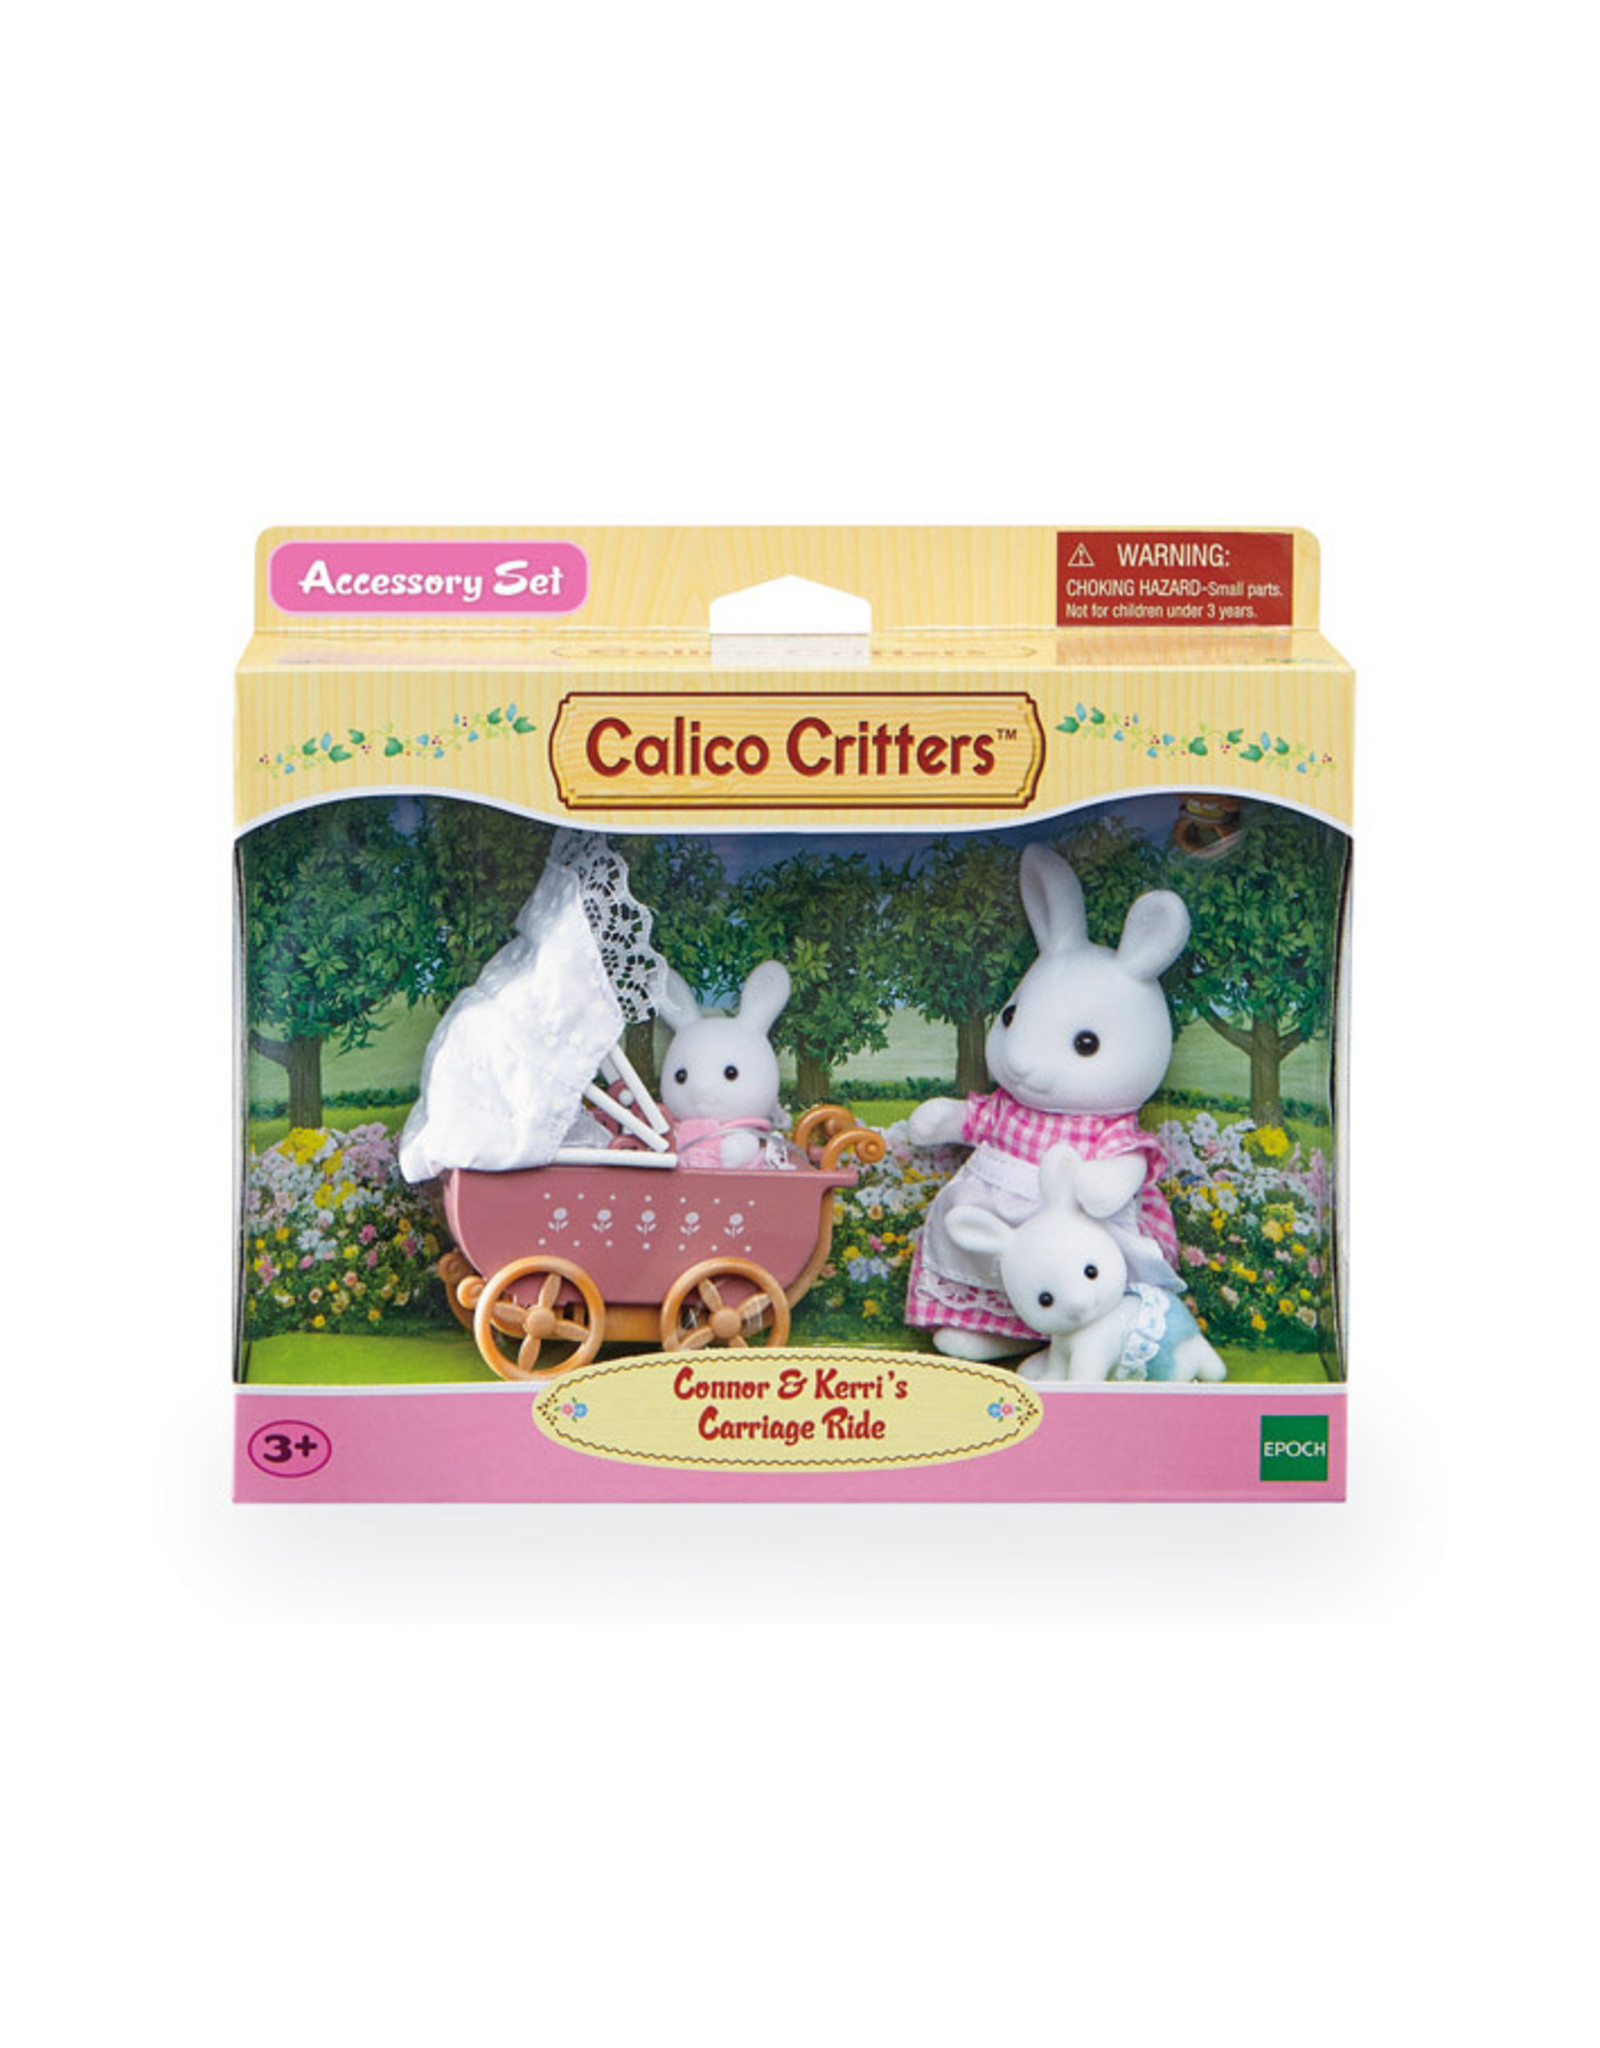 Calico Critters Calico Critters Connor N Kerri's Carriage Ride